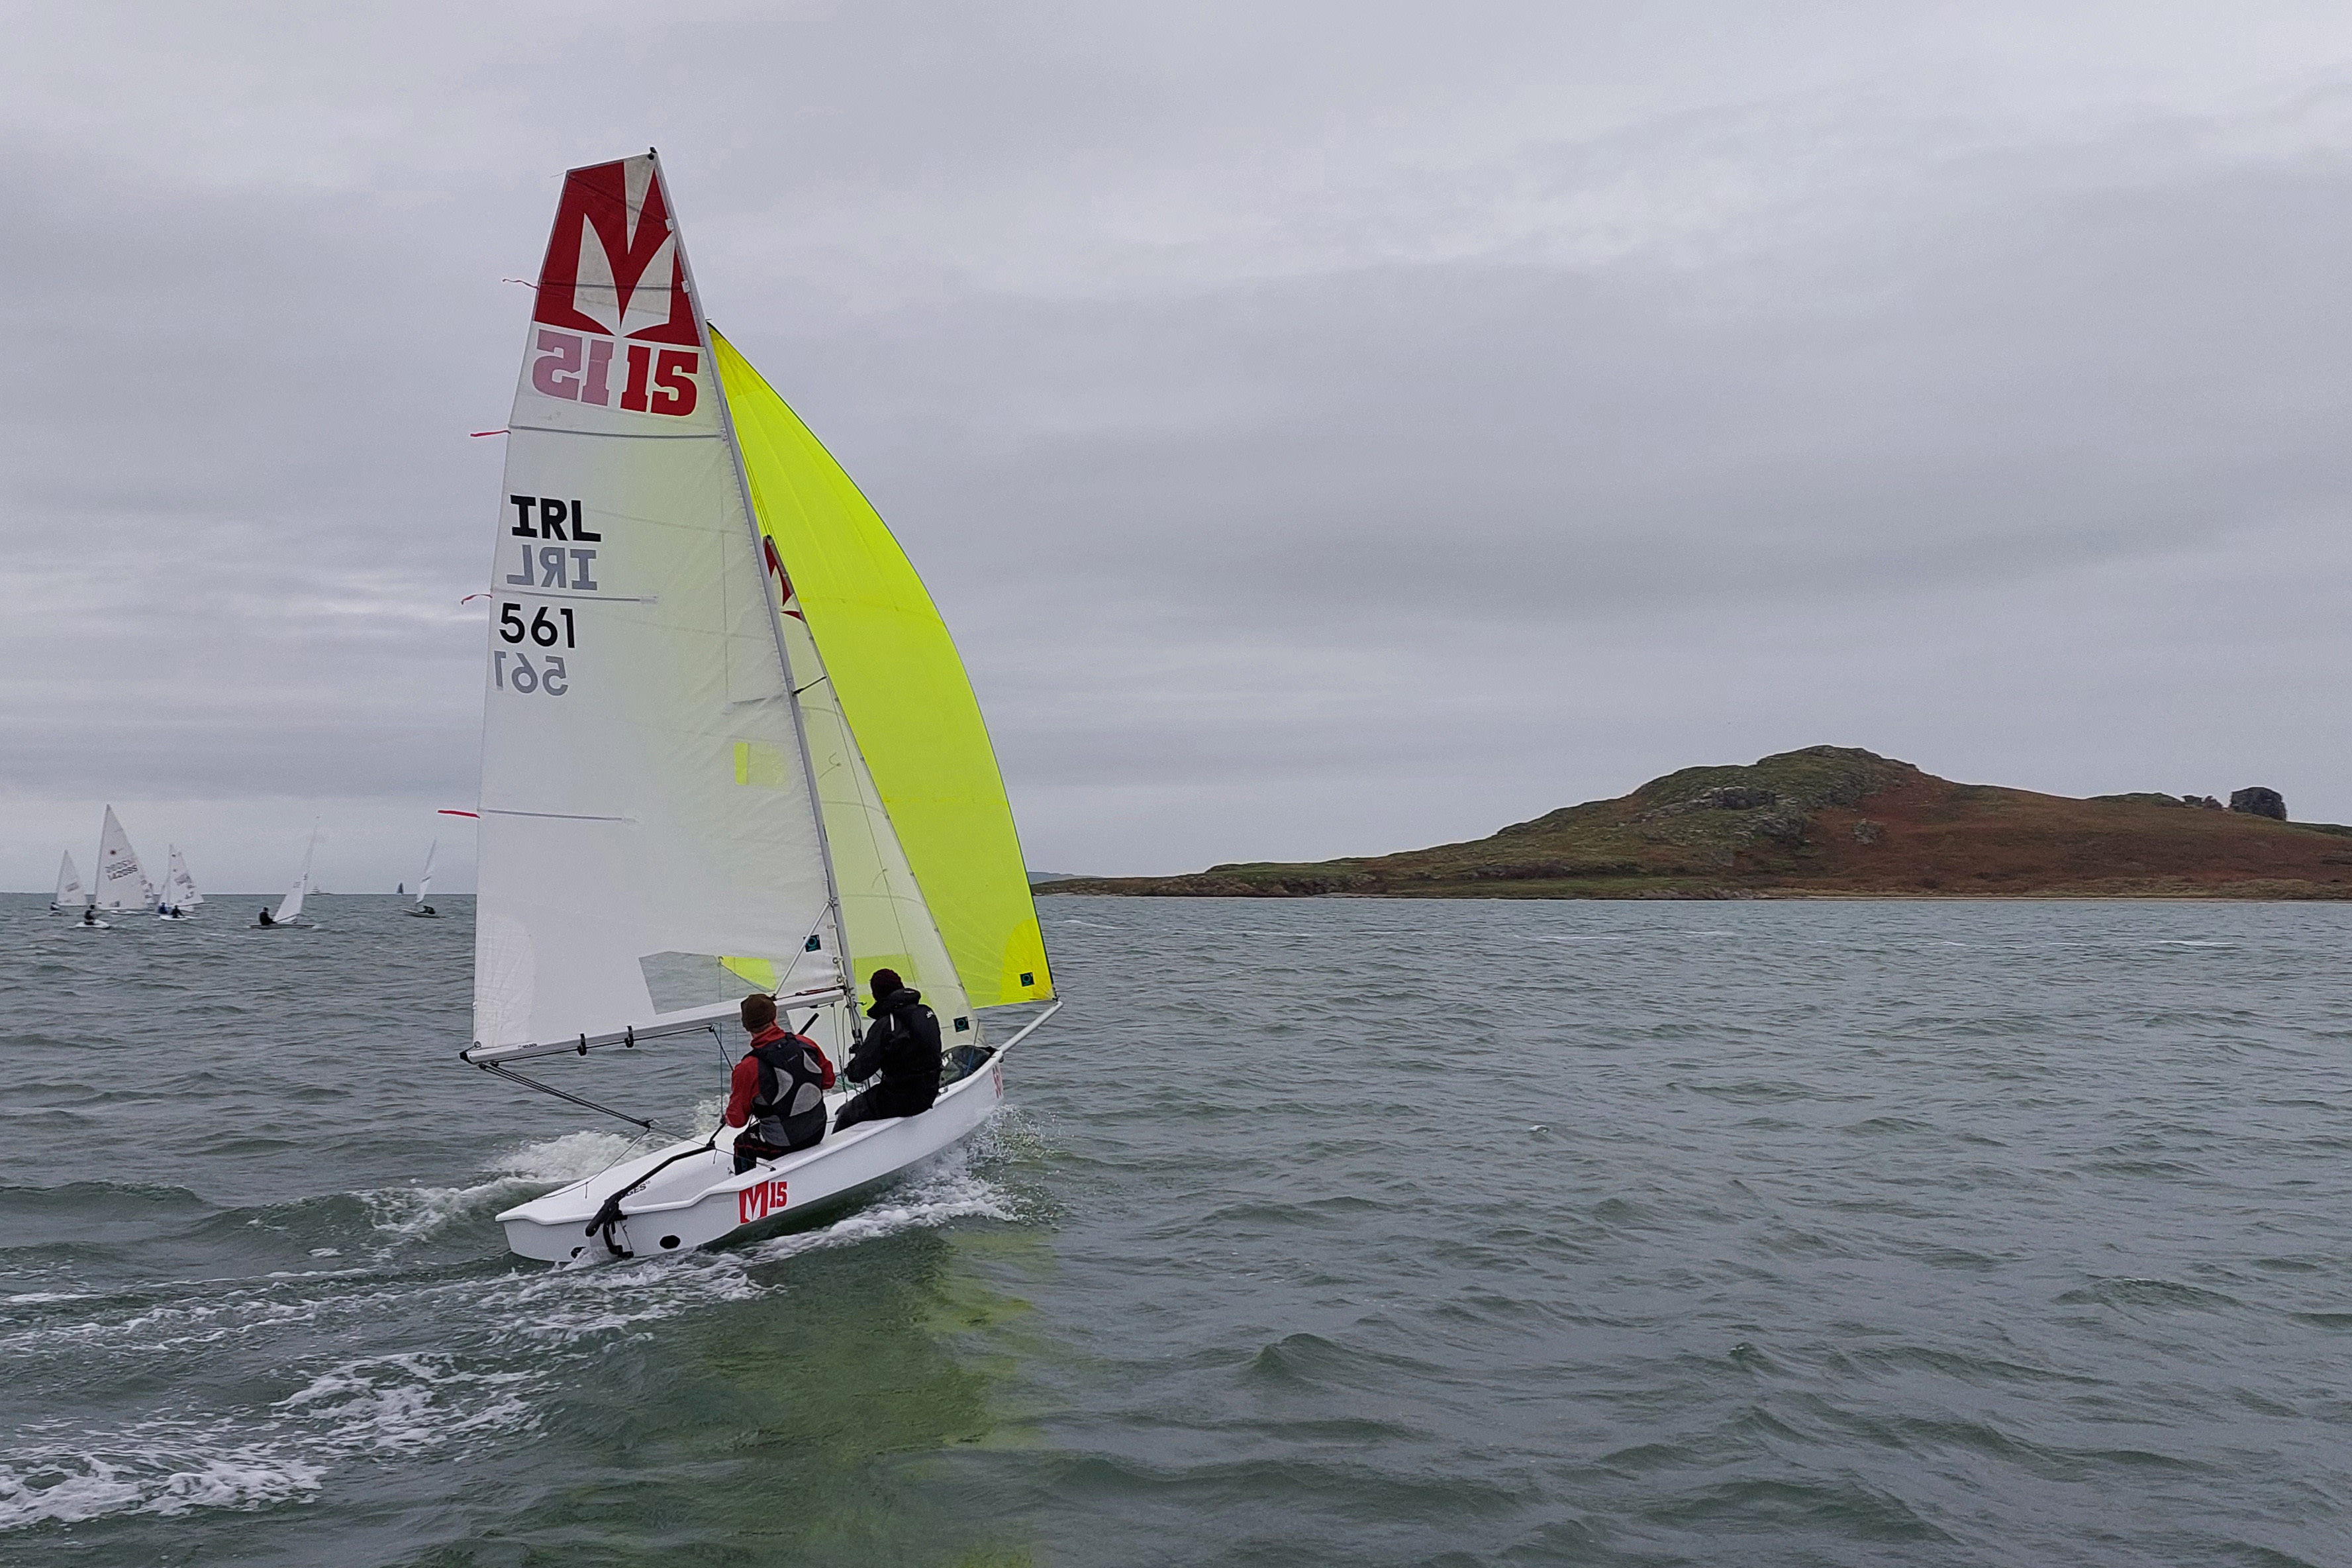 Michael Evans and Sinead Harte – Sunday morning excitement on the Melges 15